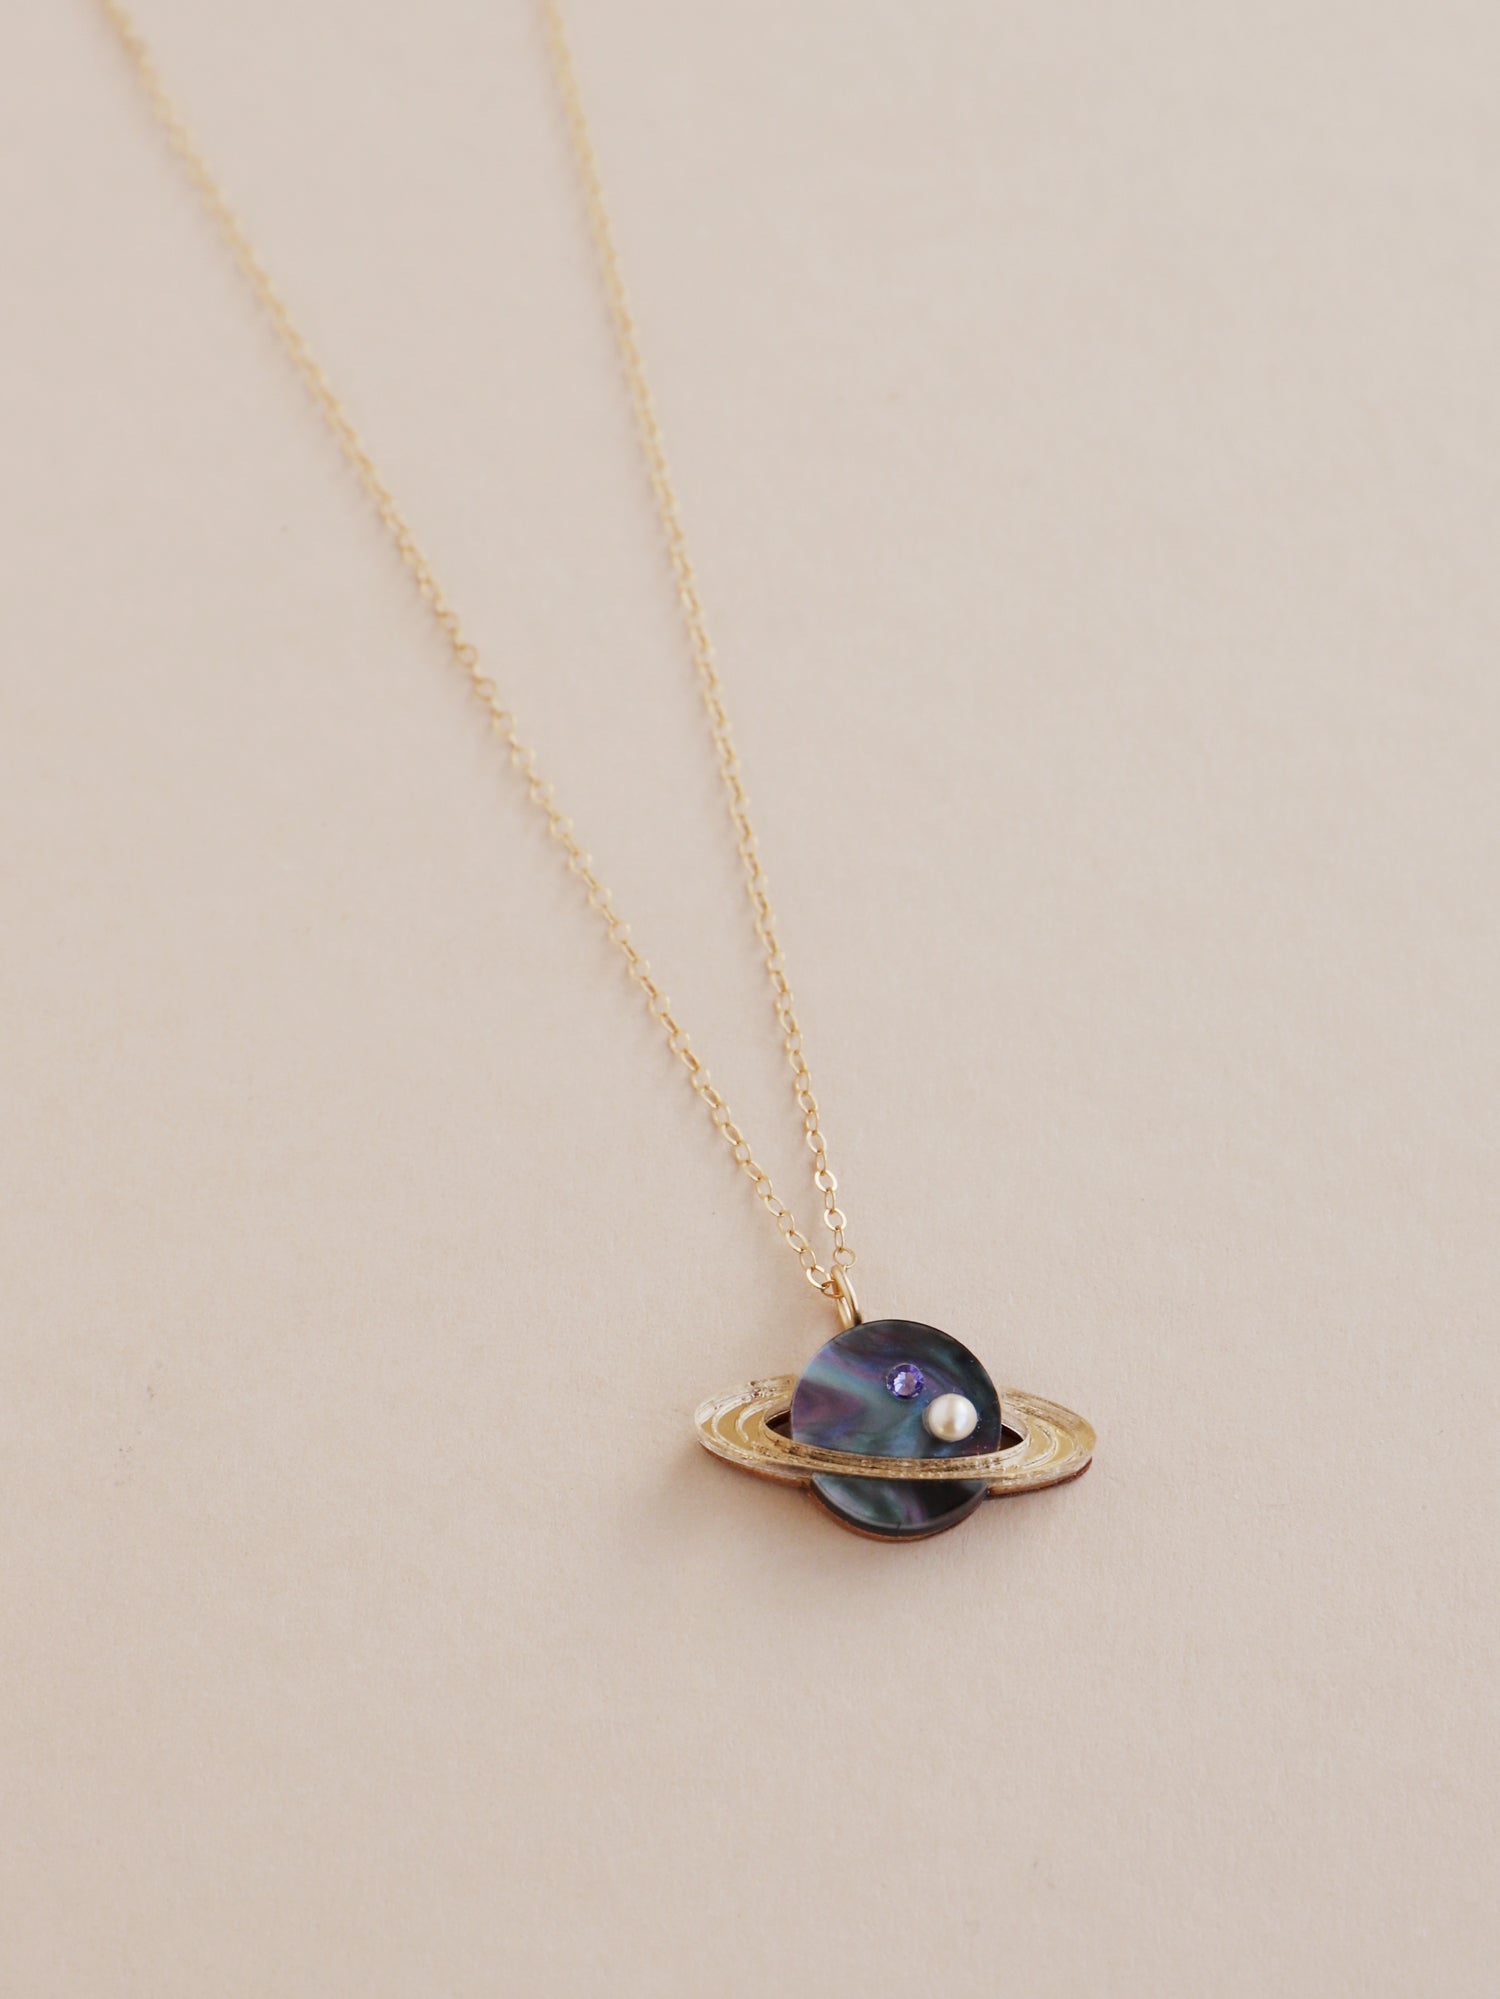 39. Saturn Necklace in Midnight - No Chain/Pendant Only - Seconds